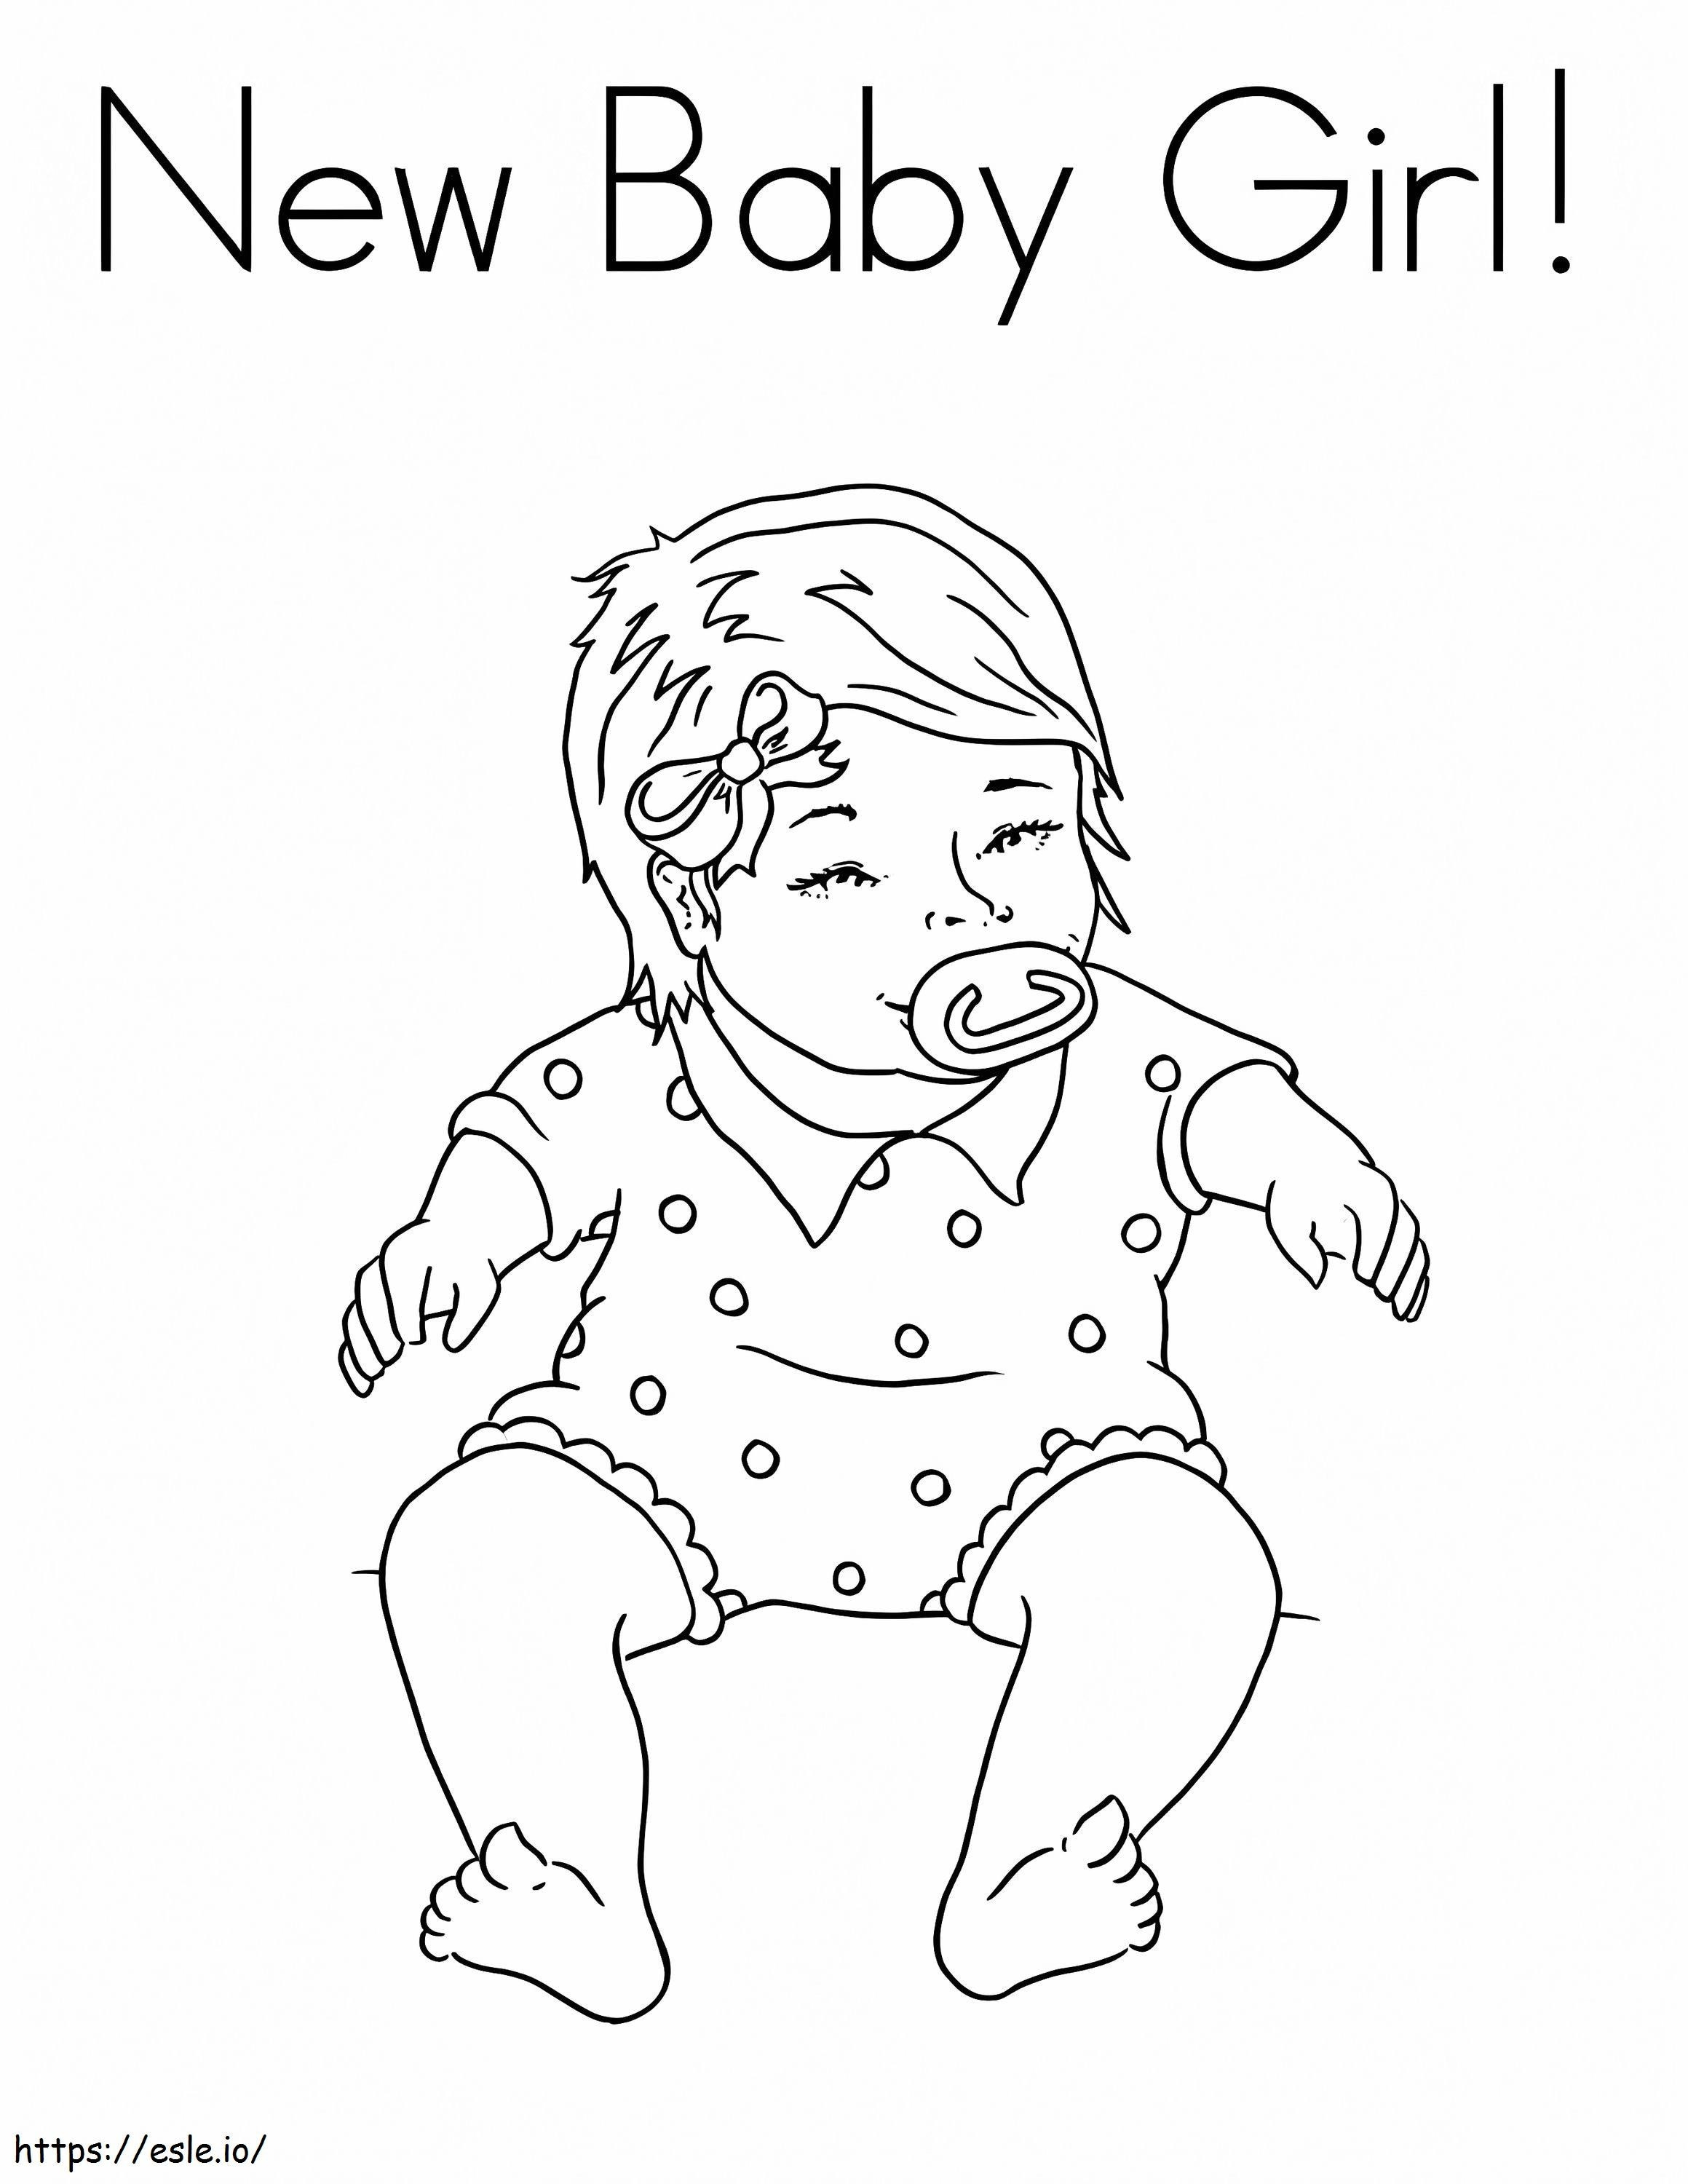 New Baby Girl coloring page